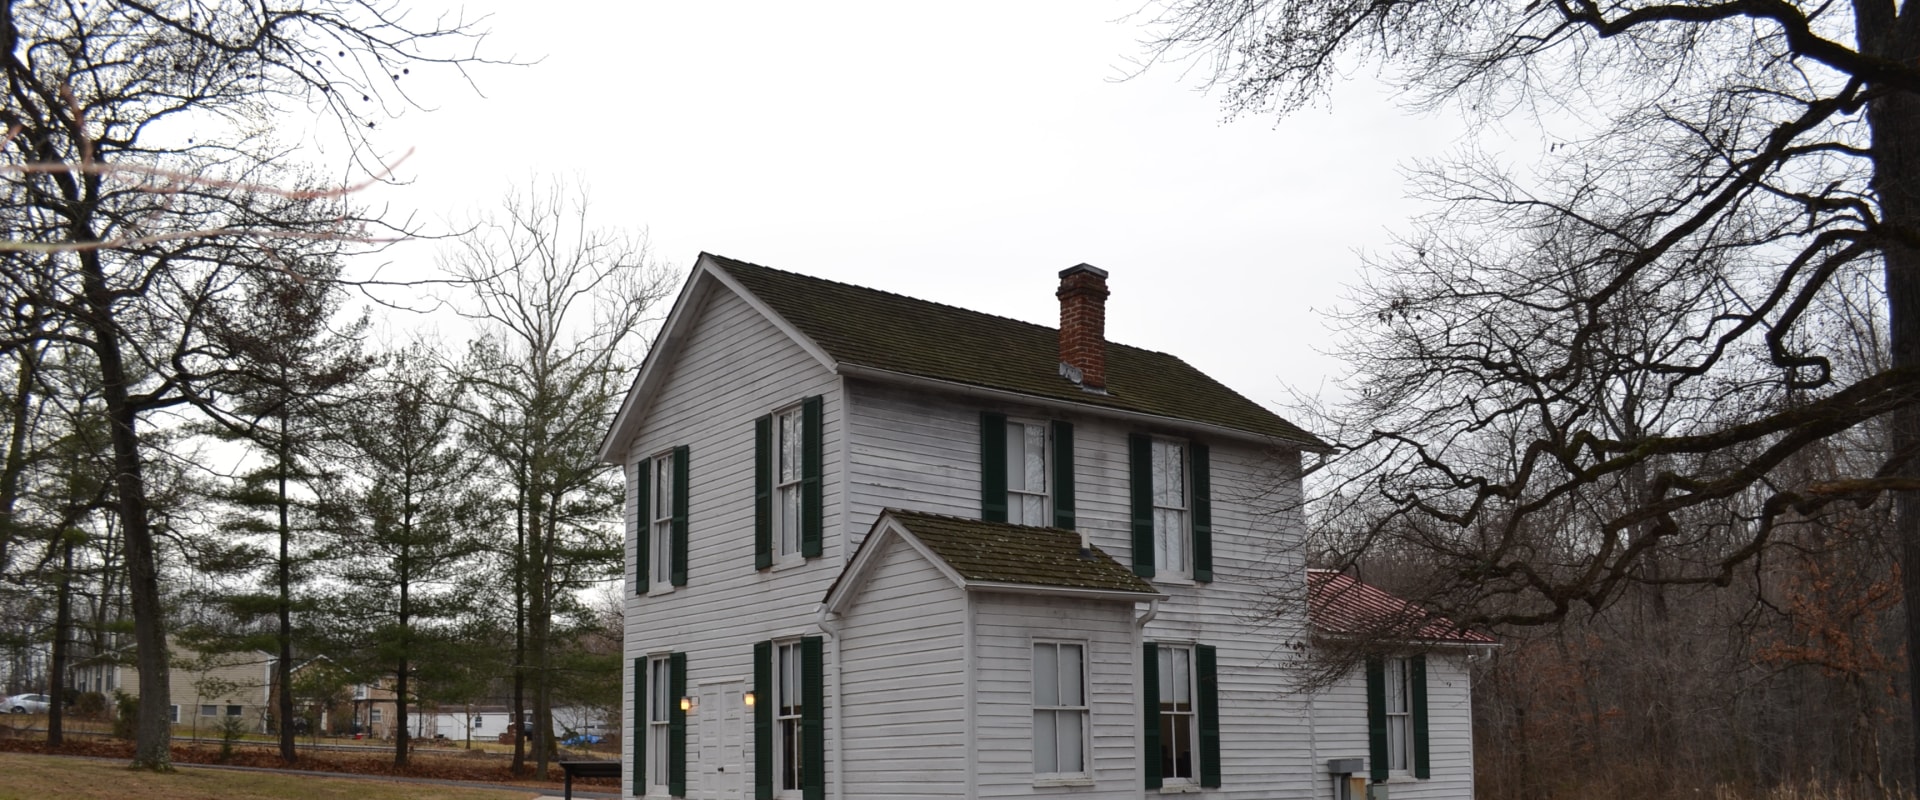 Exploring African-American History and Culture in Calvert County